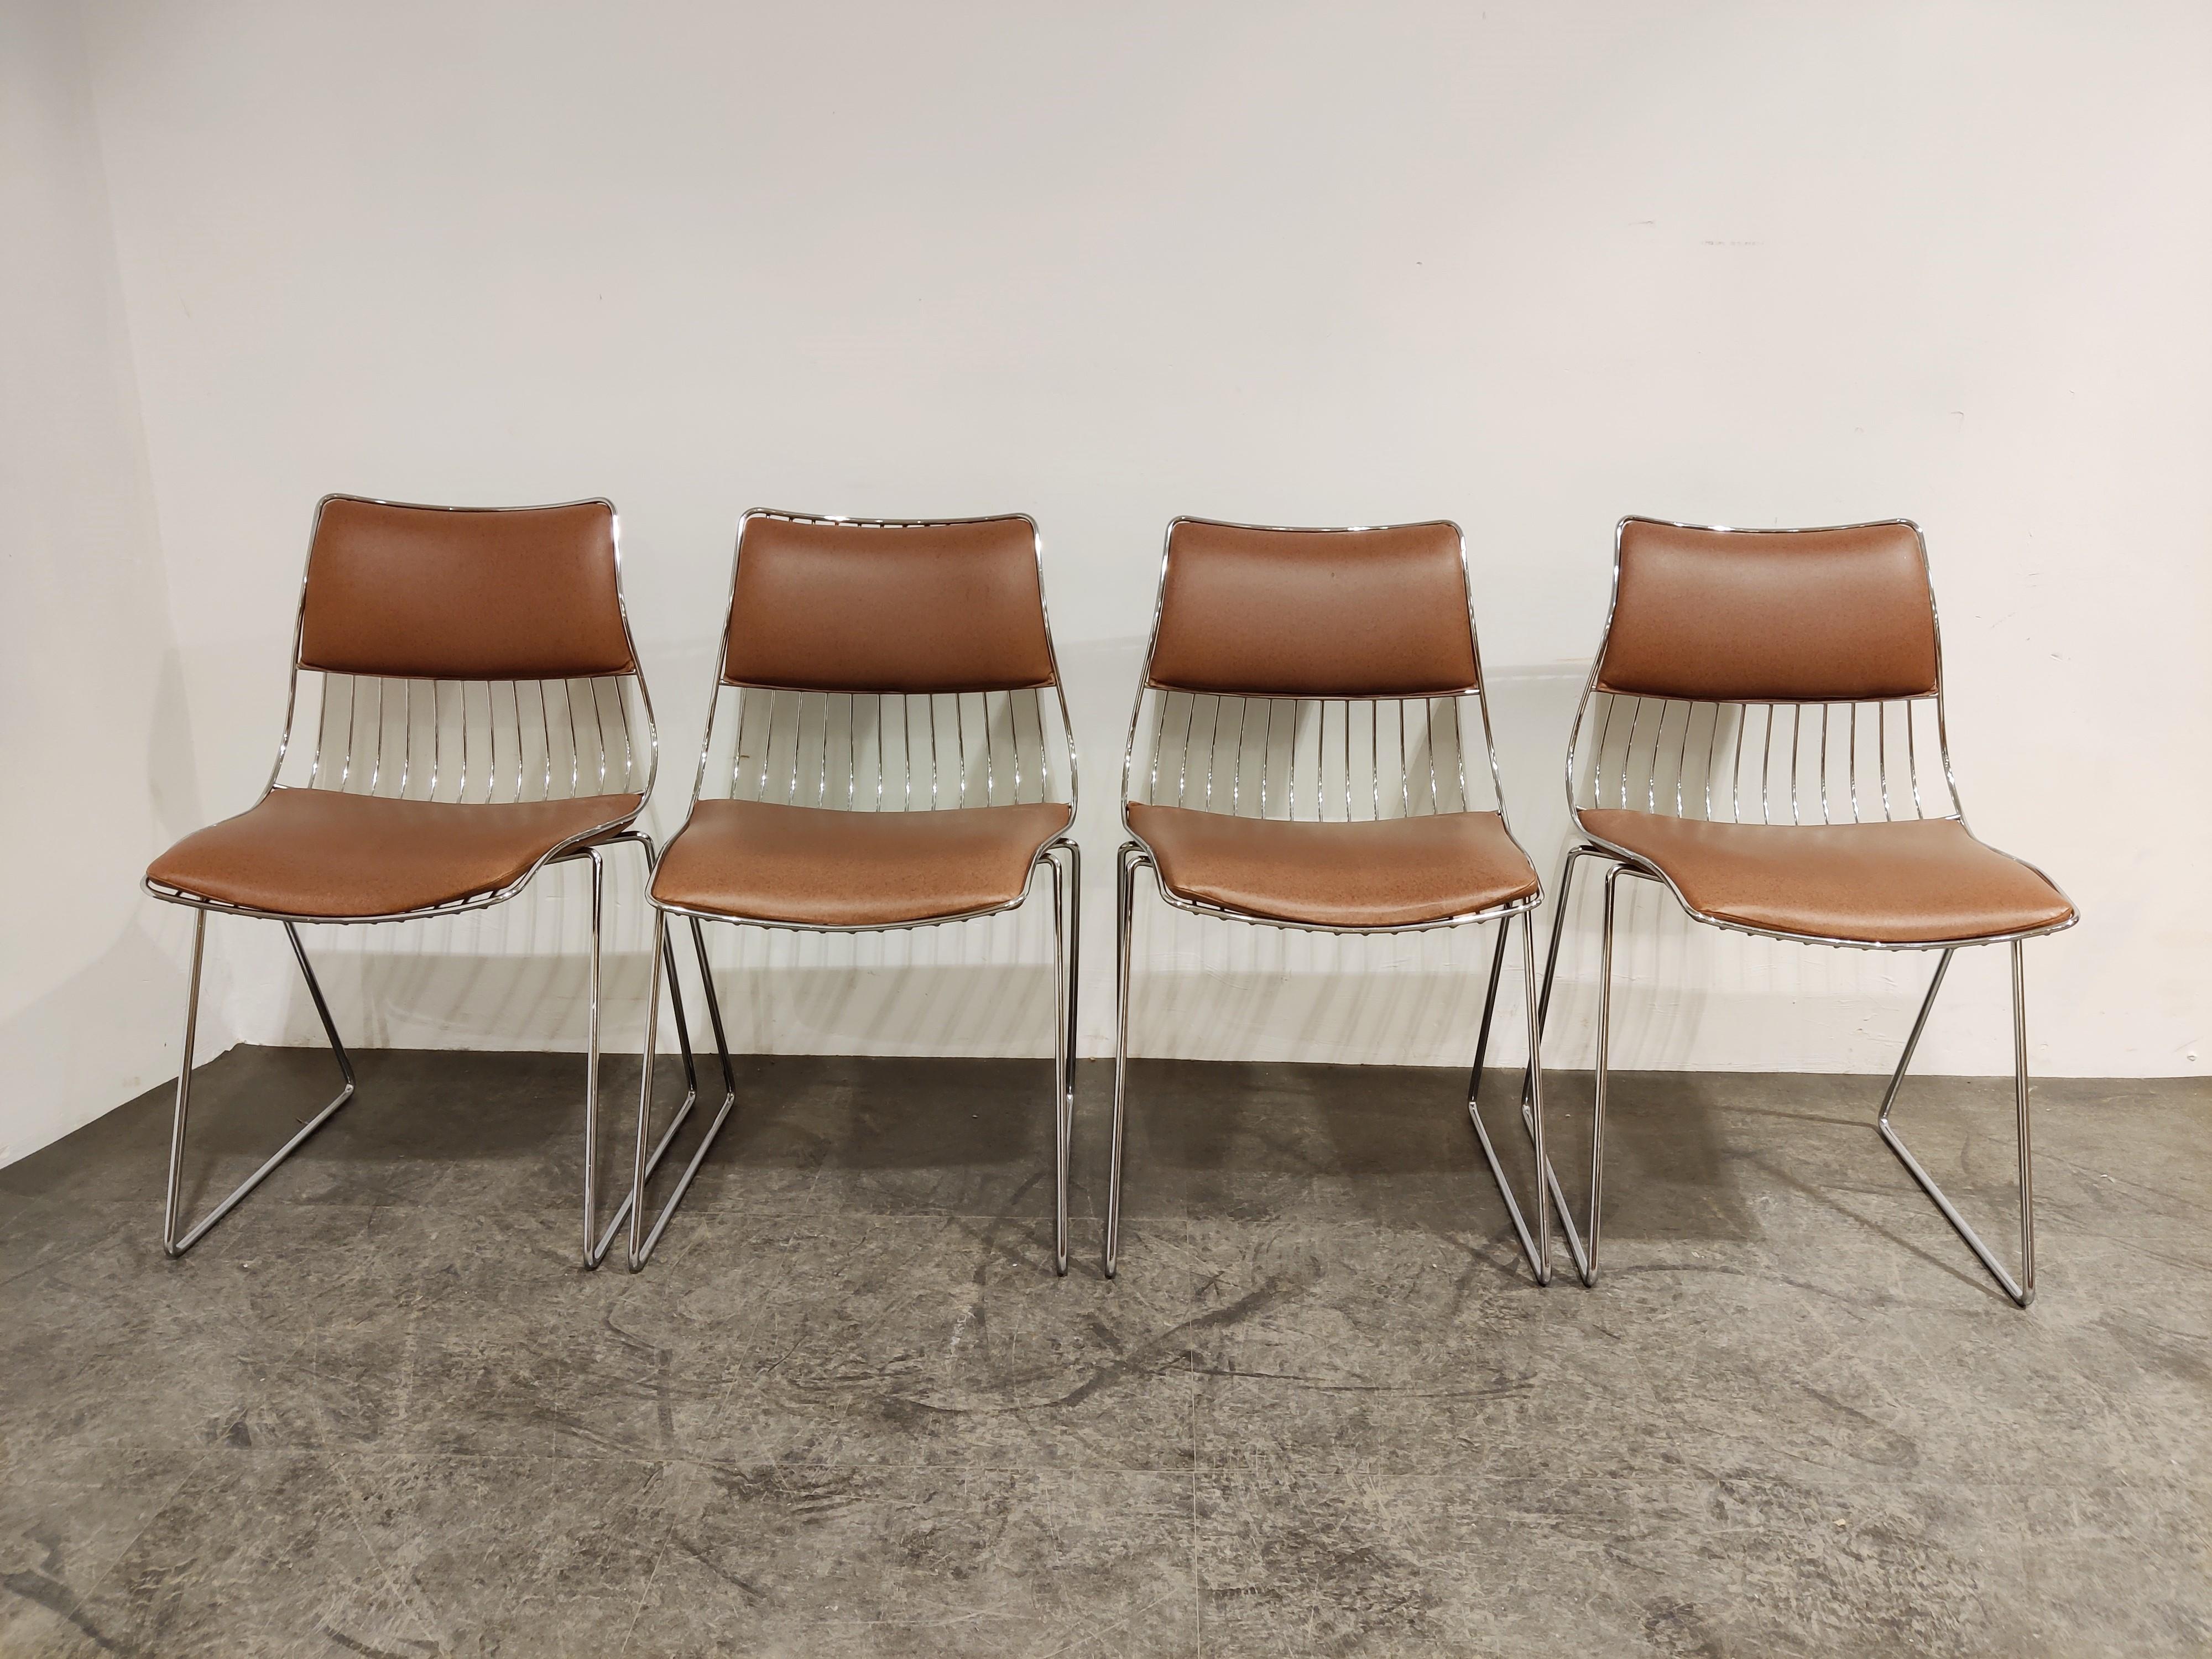 Space Age Set of 4 Dining Chairs by Rudi Verelst for Novalux, 1970s